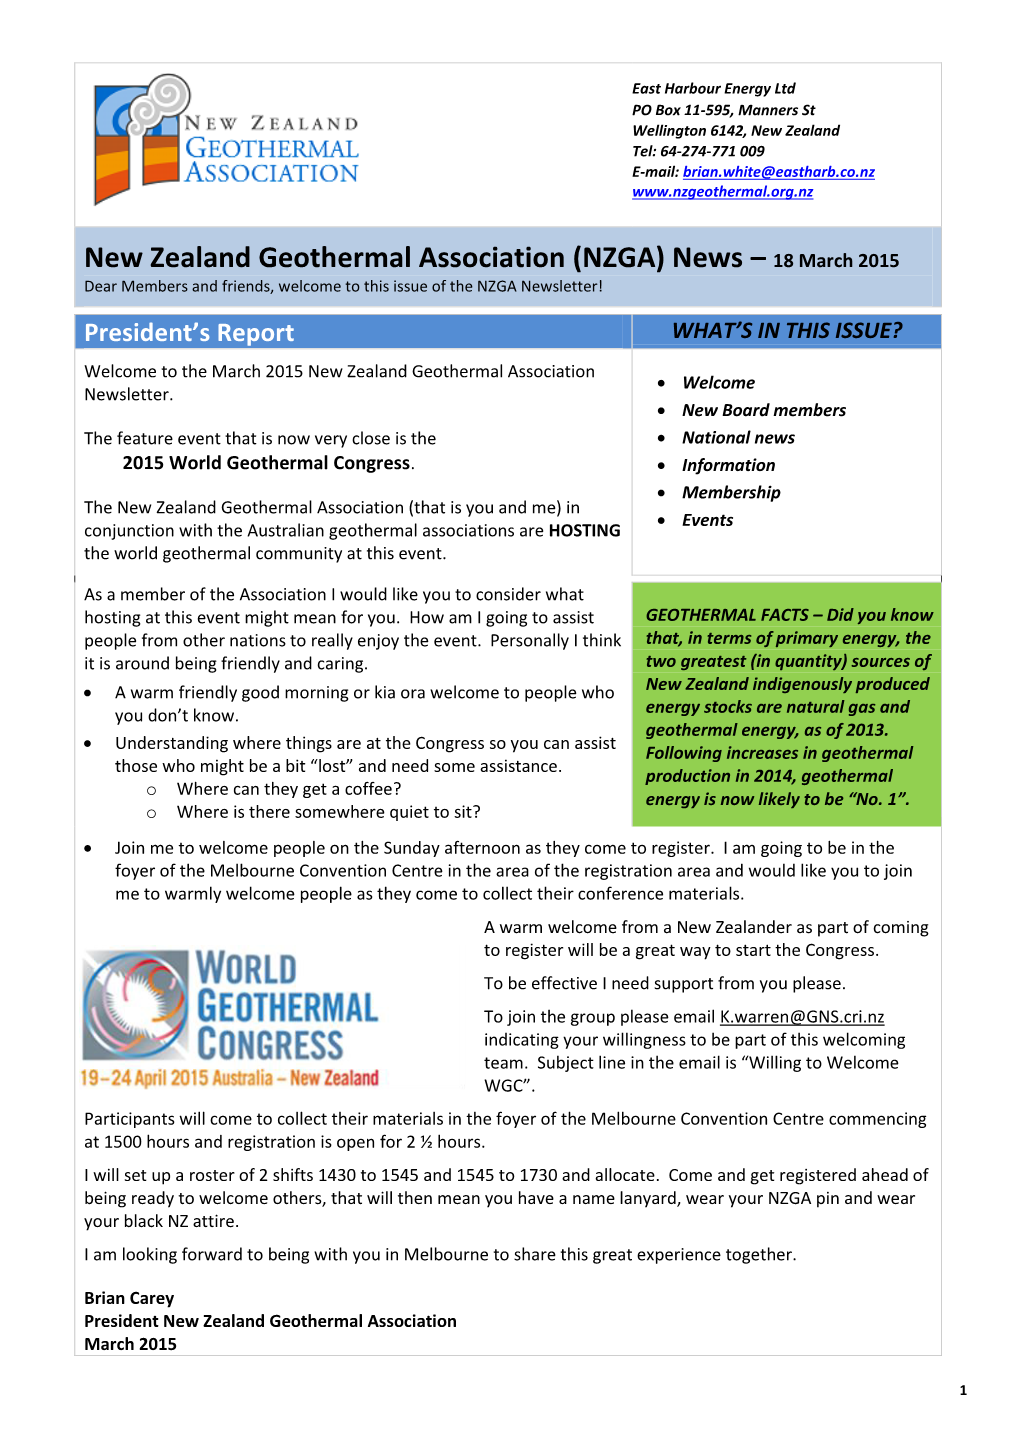 New Zealand Geothermal Association (NZGA) News – 18 March 2015 Dear Members and Friends, Welcome to This Issue of the NZGA Newsletter!